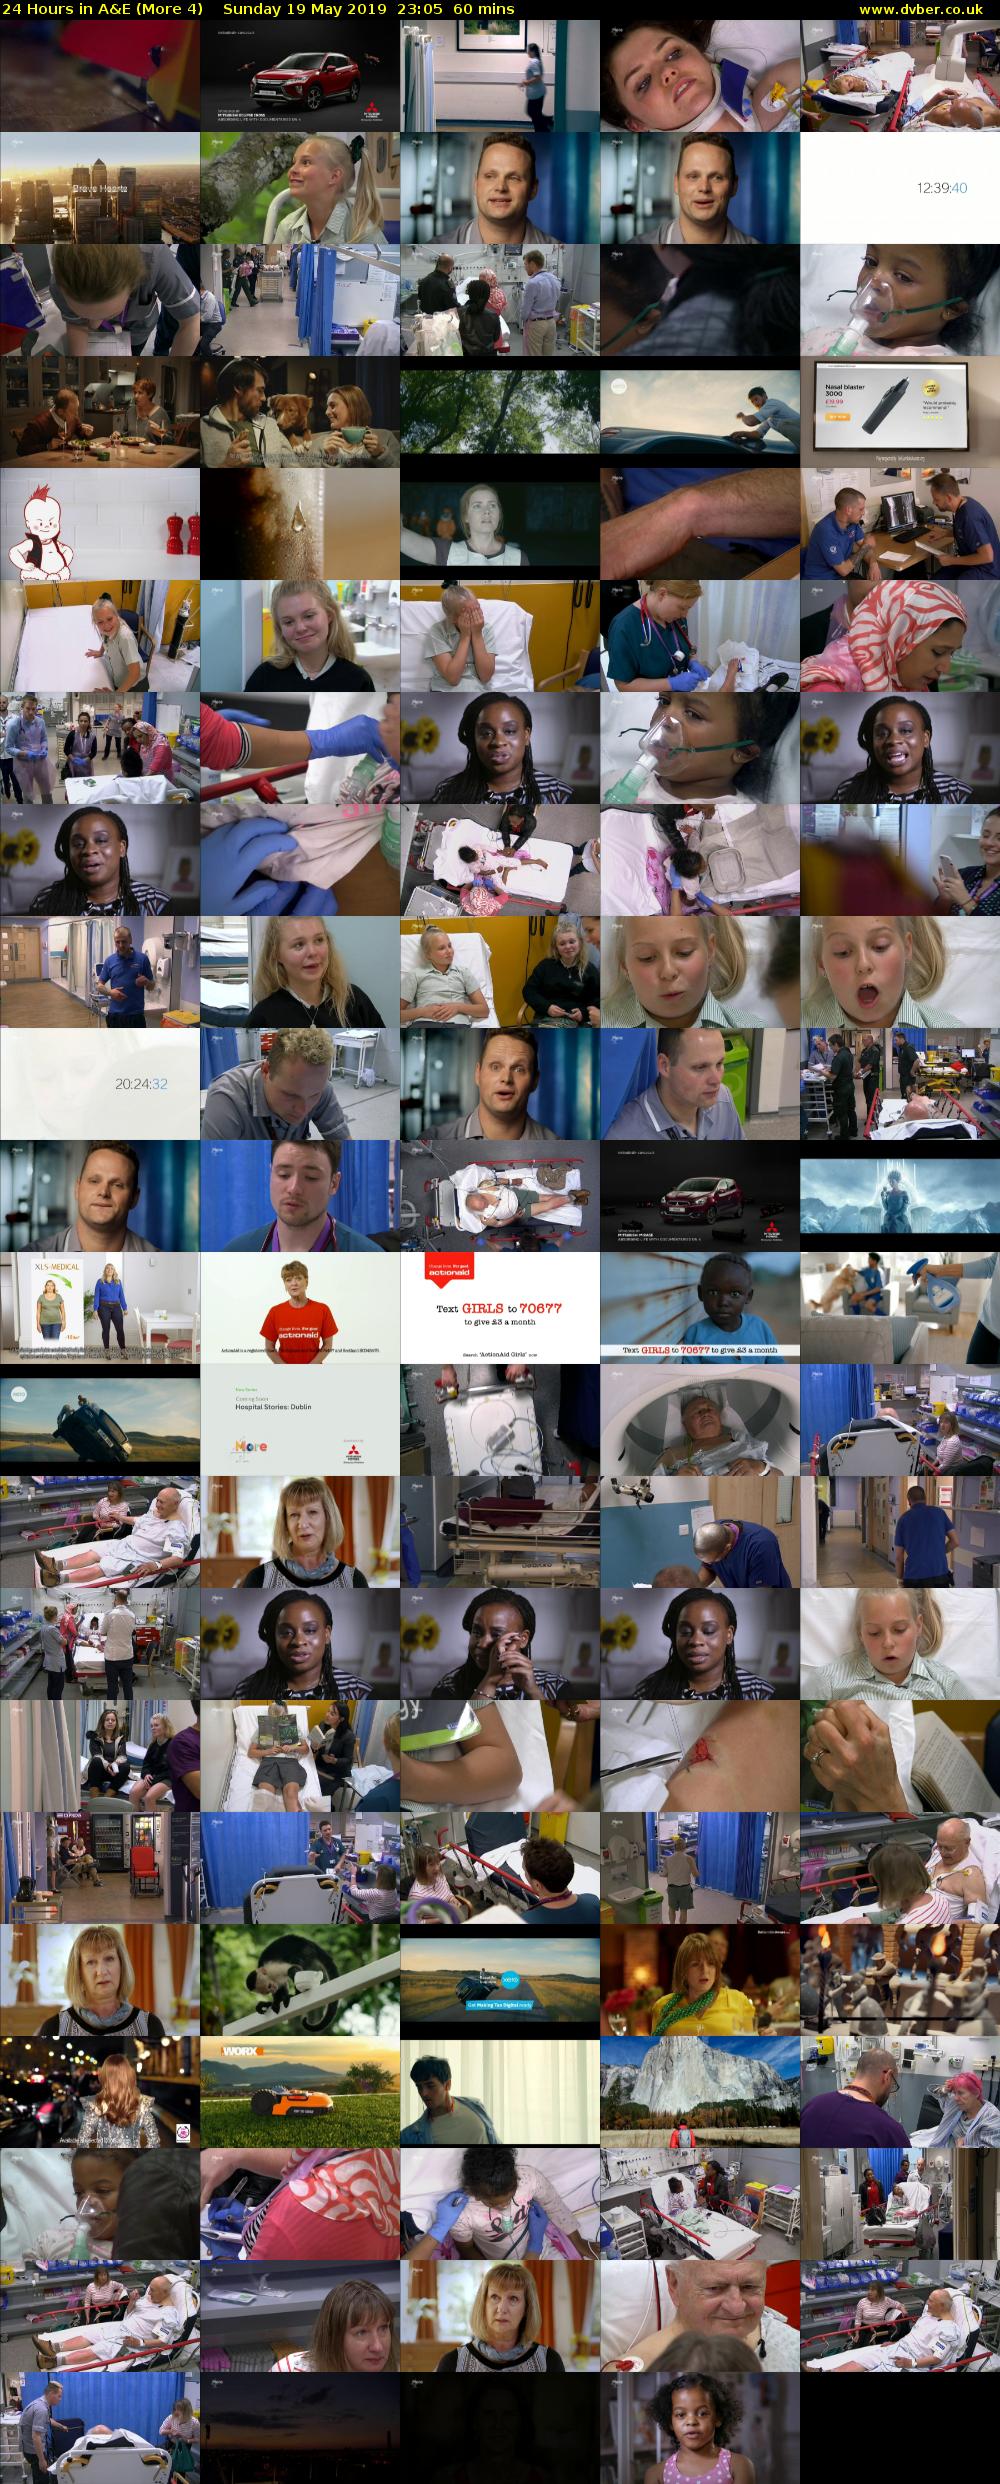 24 Hours in A&E (More 4) Sunday 19 May 2019 23:05 - 00:05